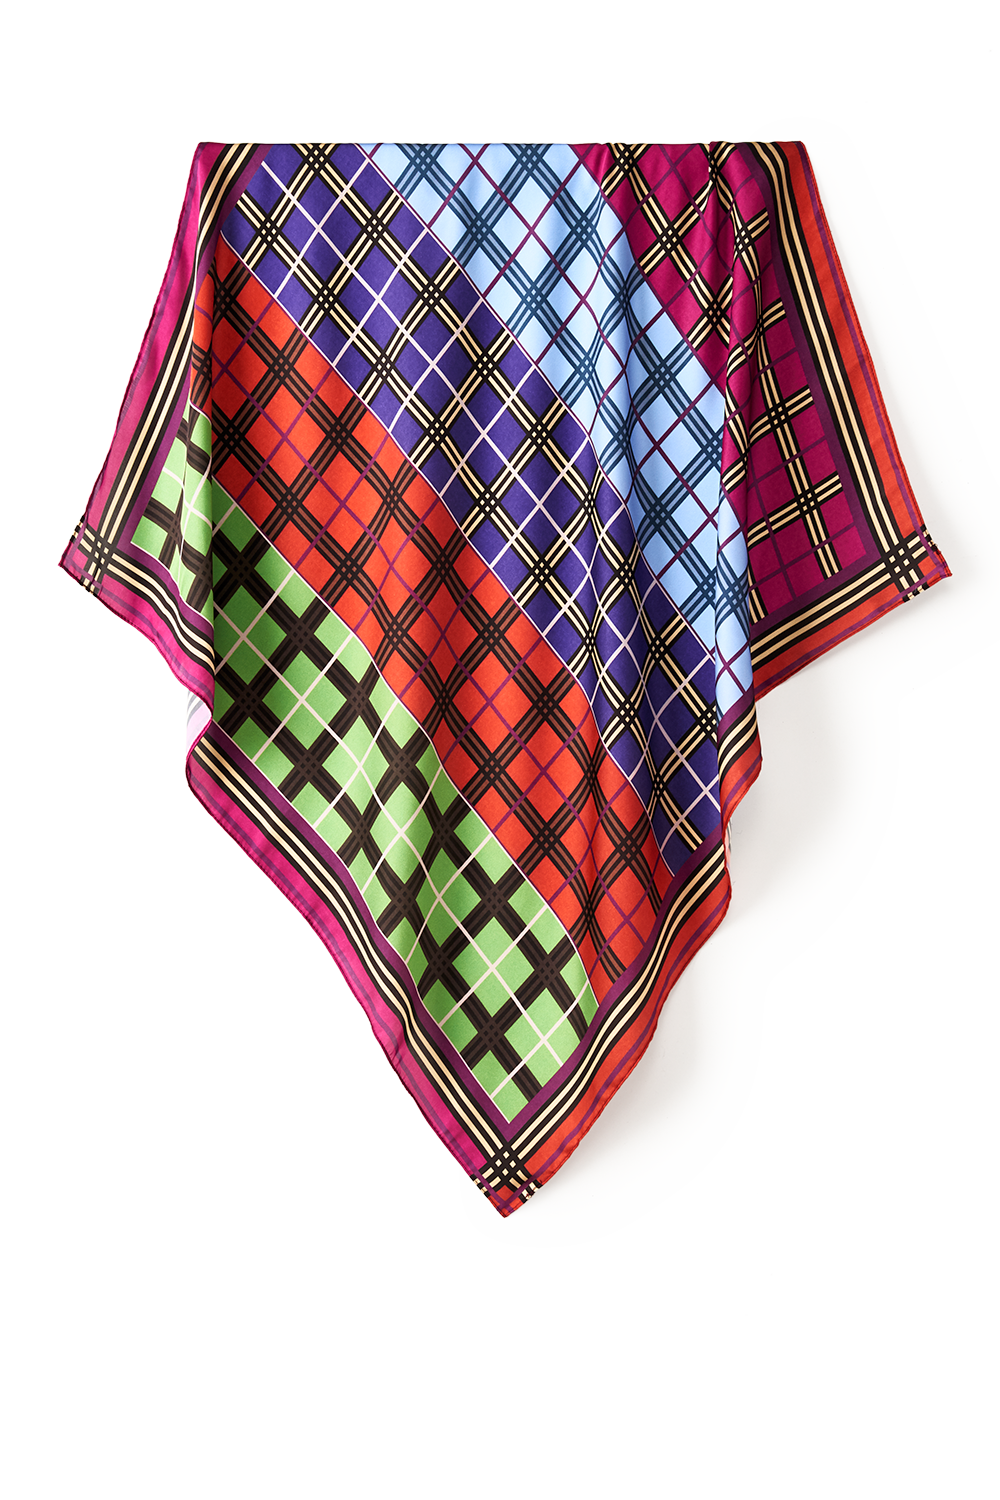 SCARF 70x70 CHECKED COLORS | POLYESTER SATIN